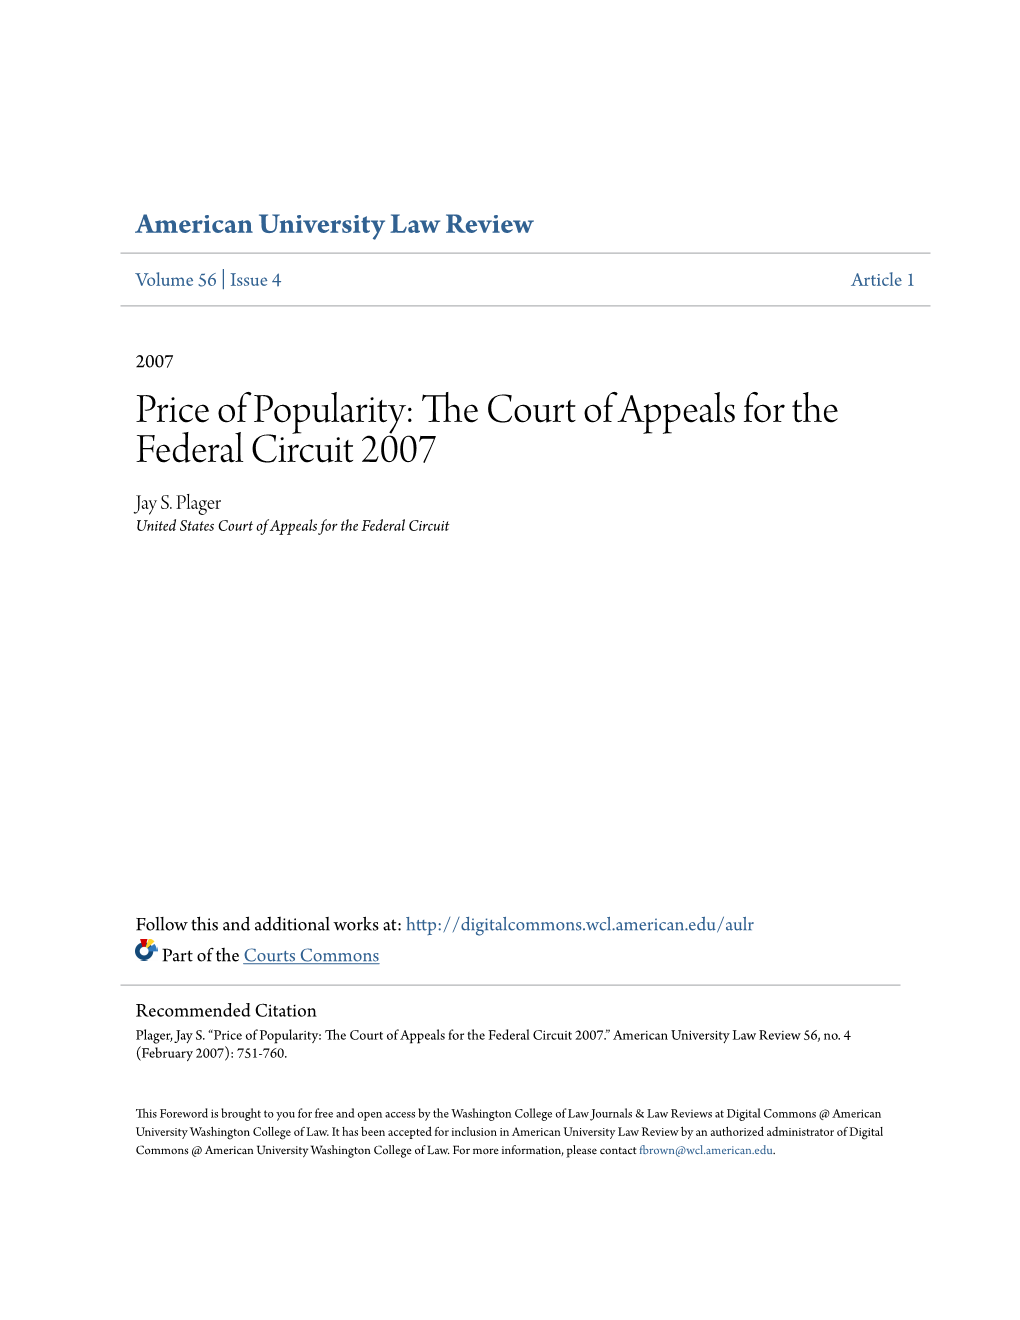 The Court of Appeals for the Federal Circuit 2007